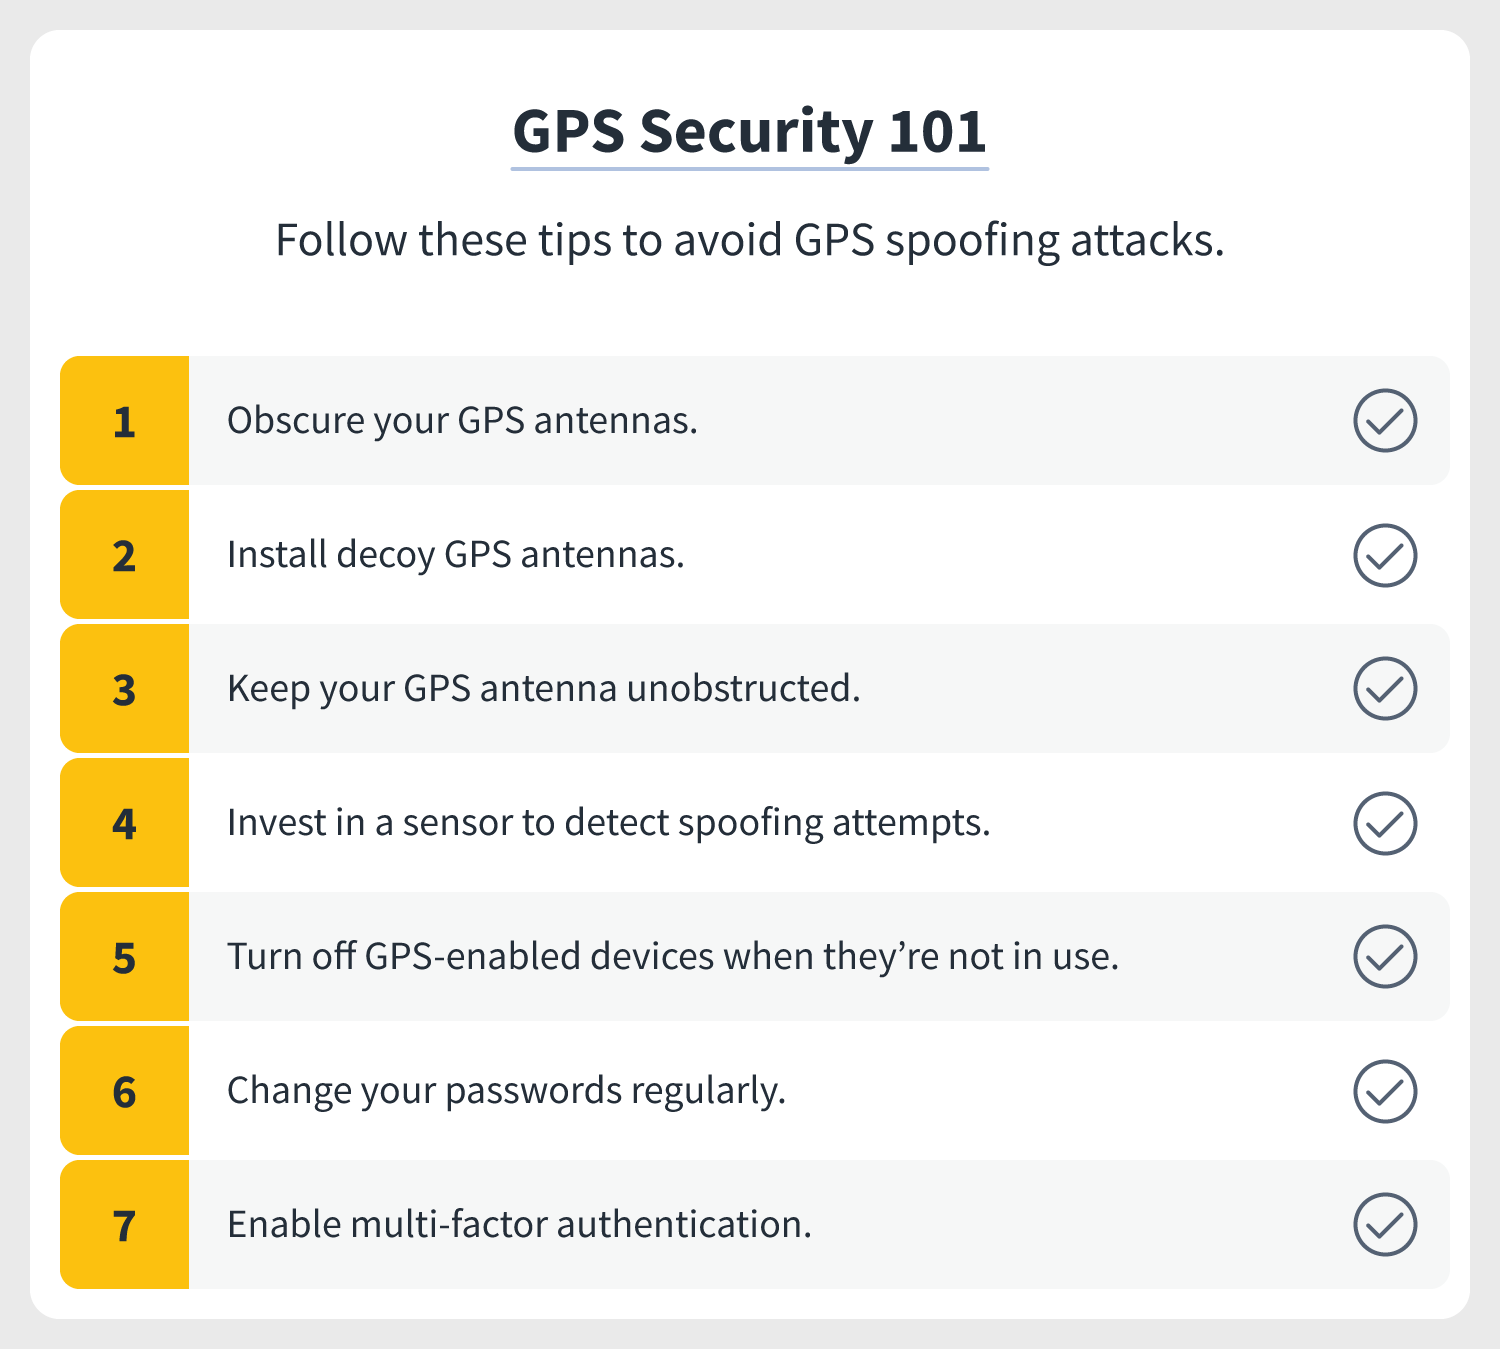 A checklist of how to avoid GPS spoofing attacks including obscure your GPS antennas, install decoy GPS antennas, keep your GPS antenna unobstructed, and more. 